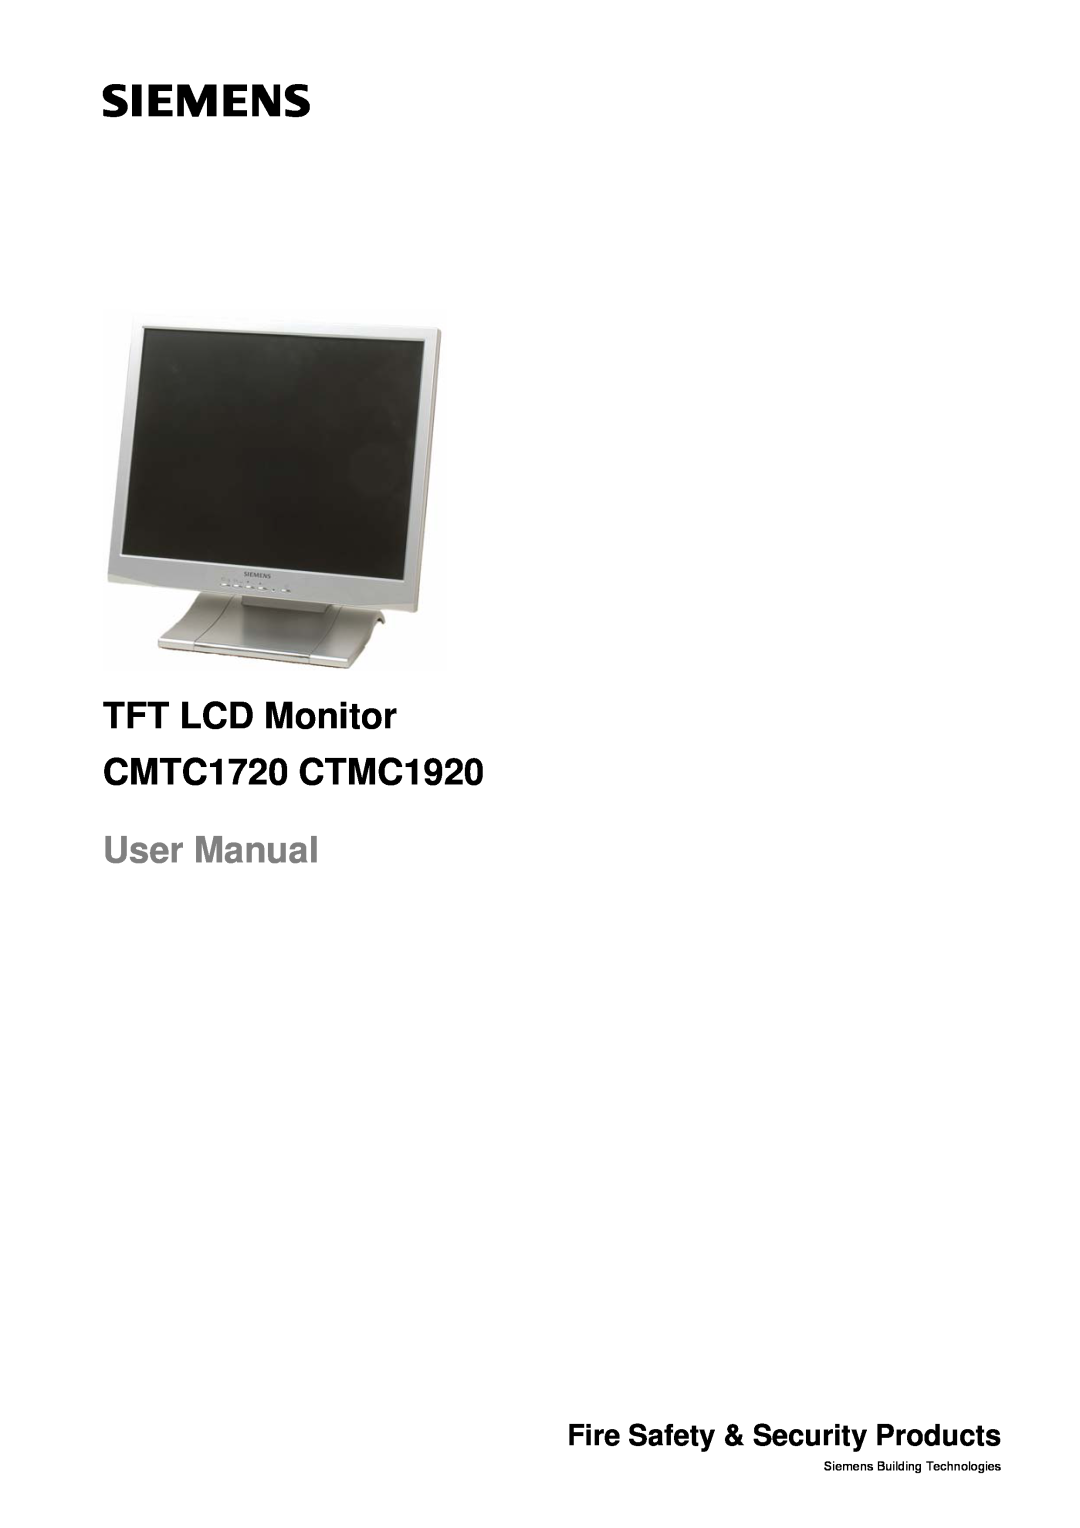 Siemens CMTC1920 user manual TFT LCD Monitor CMTC1720 CTMC1920, Fire Safety & Security Products 